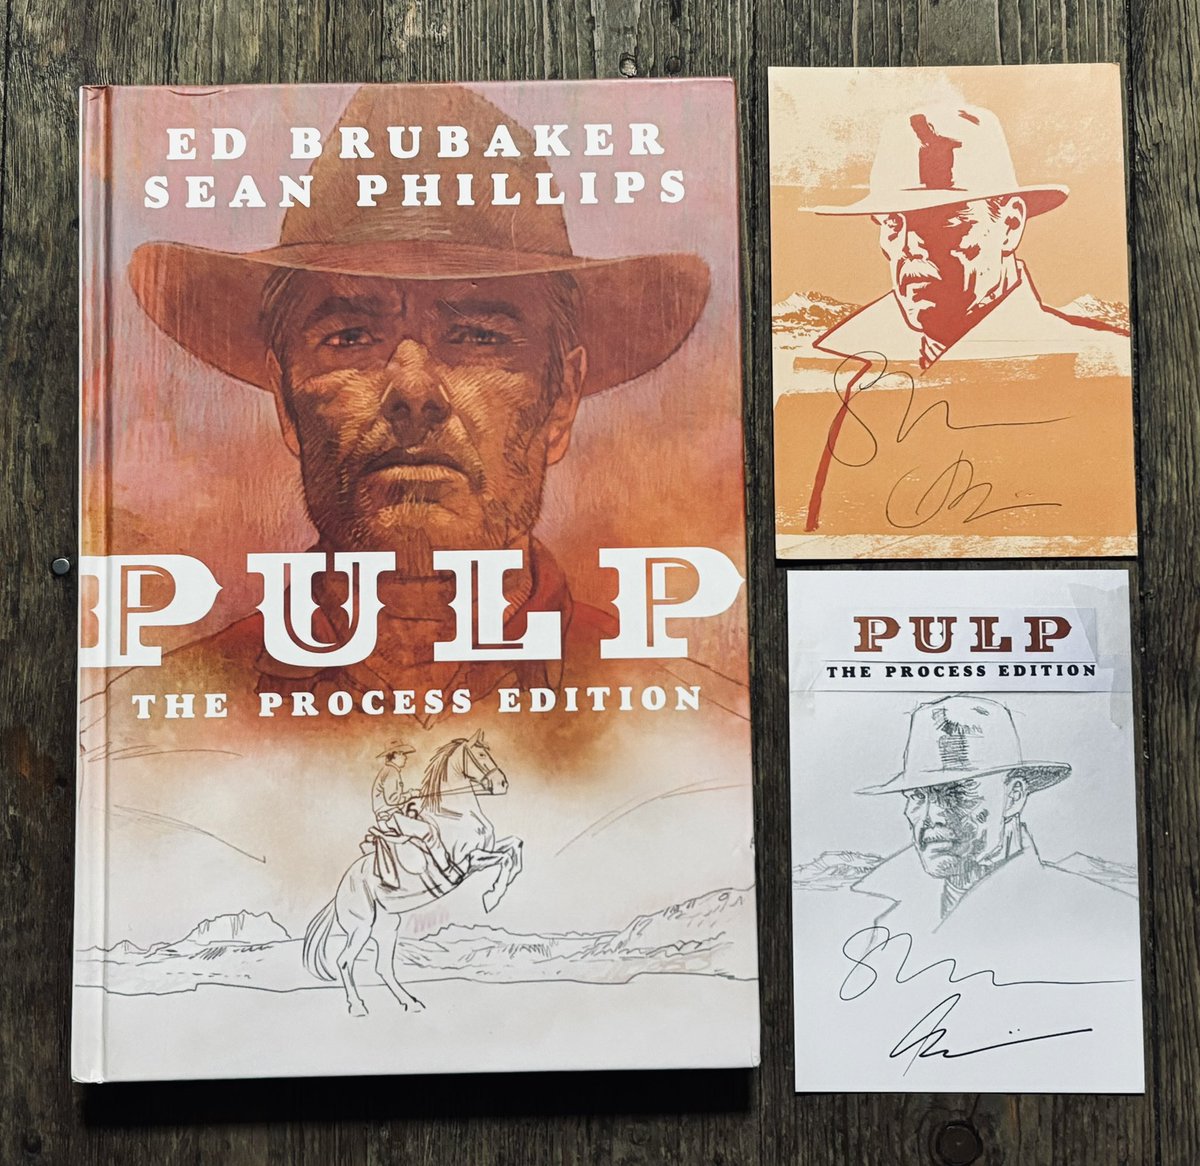 Going through the @OKComics exclusive signed bookplates and found two of our bookplates for the out of print hardcover of Pulp by @seanpphillips and @ThatJPhillips! I’ve thrown them in with our Pulp Process Edition, bound to sell out! Treat yourself: okcomics.co.uk/products/pulp-…